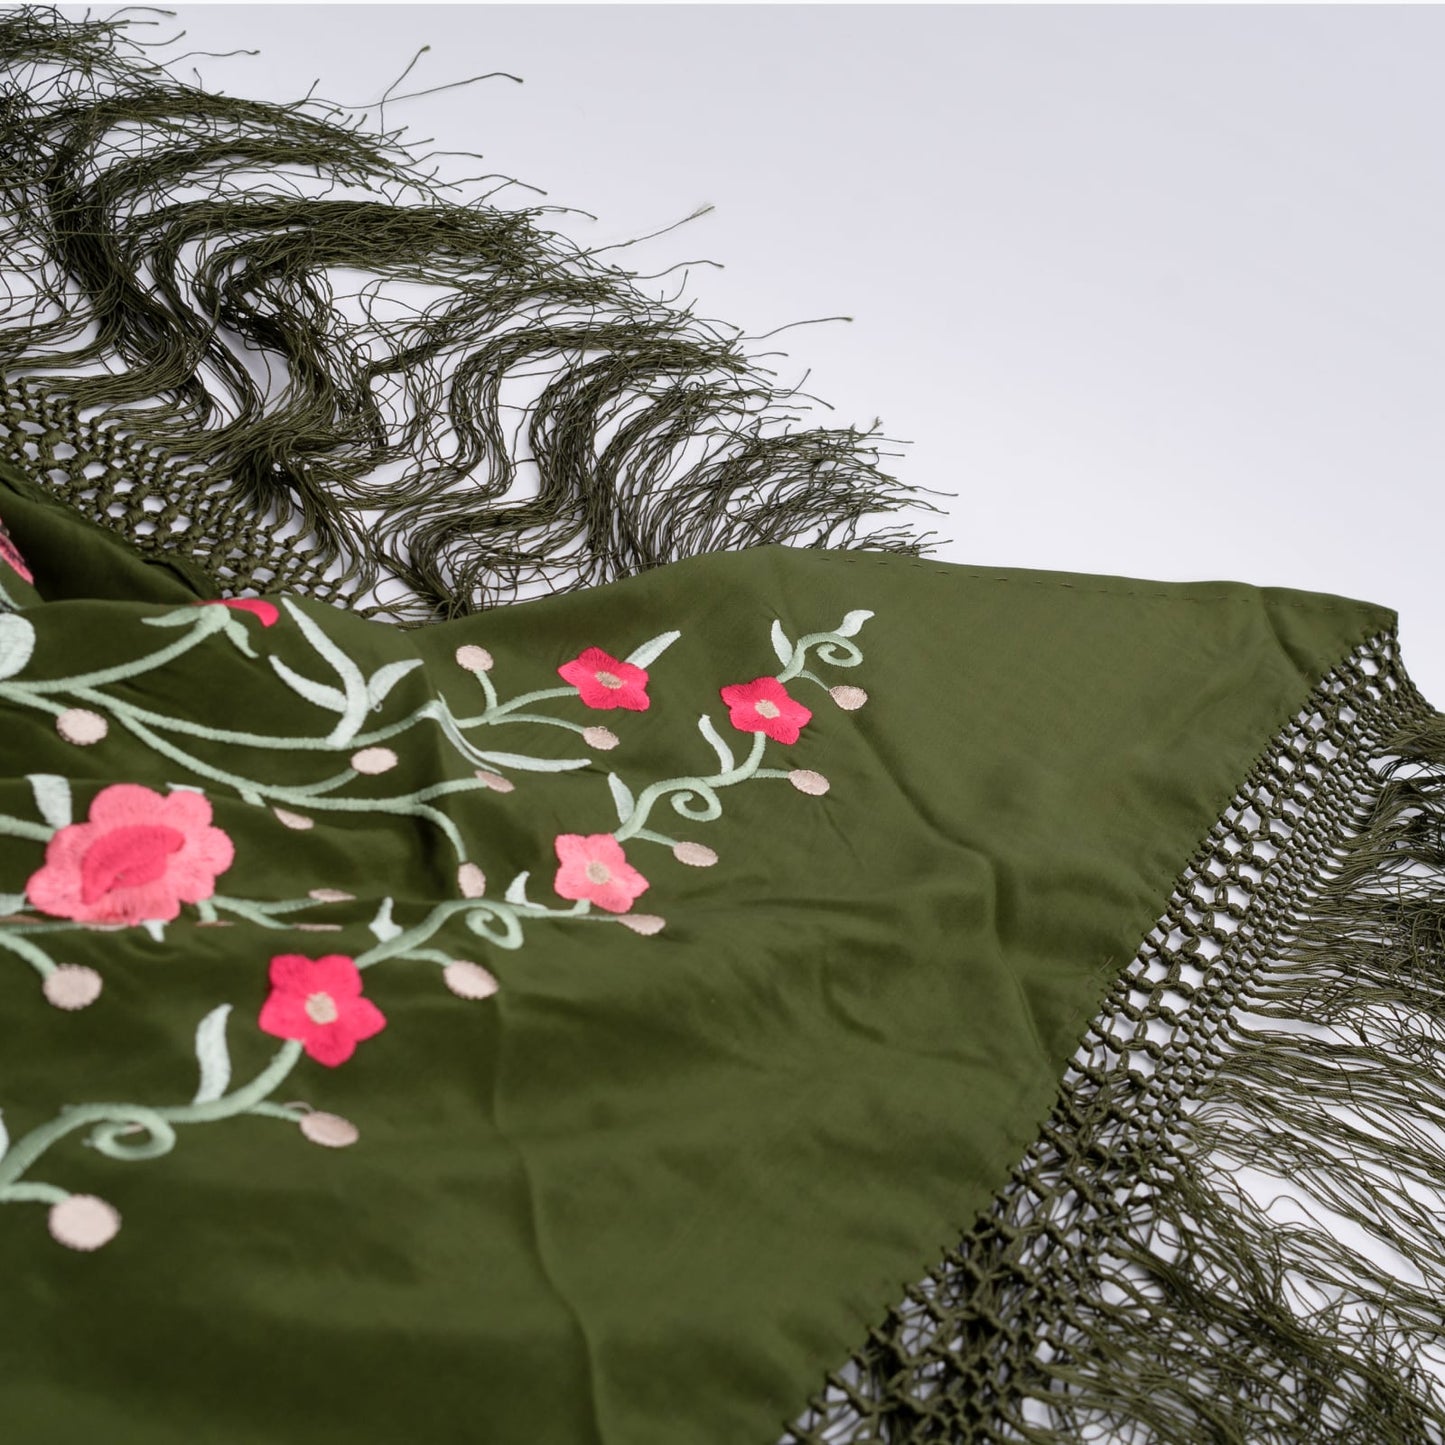 Green olive floral embroidered mantoncillo shawl.